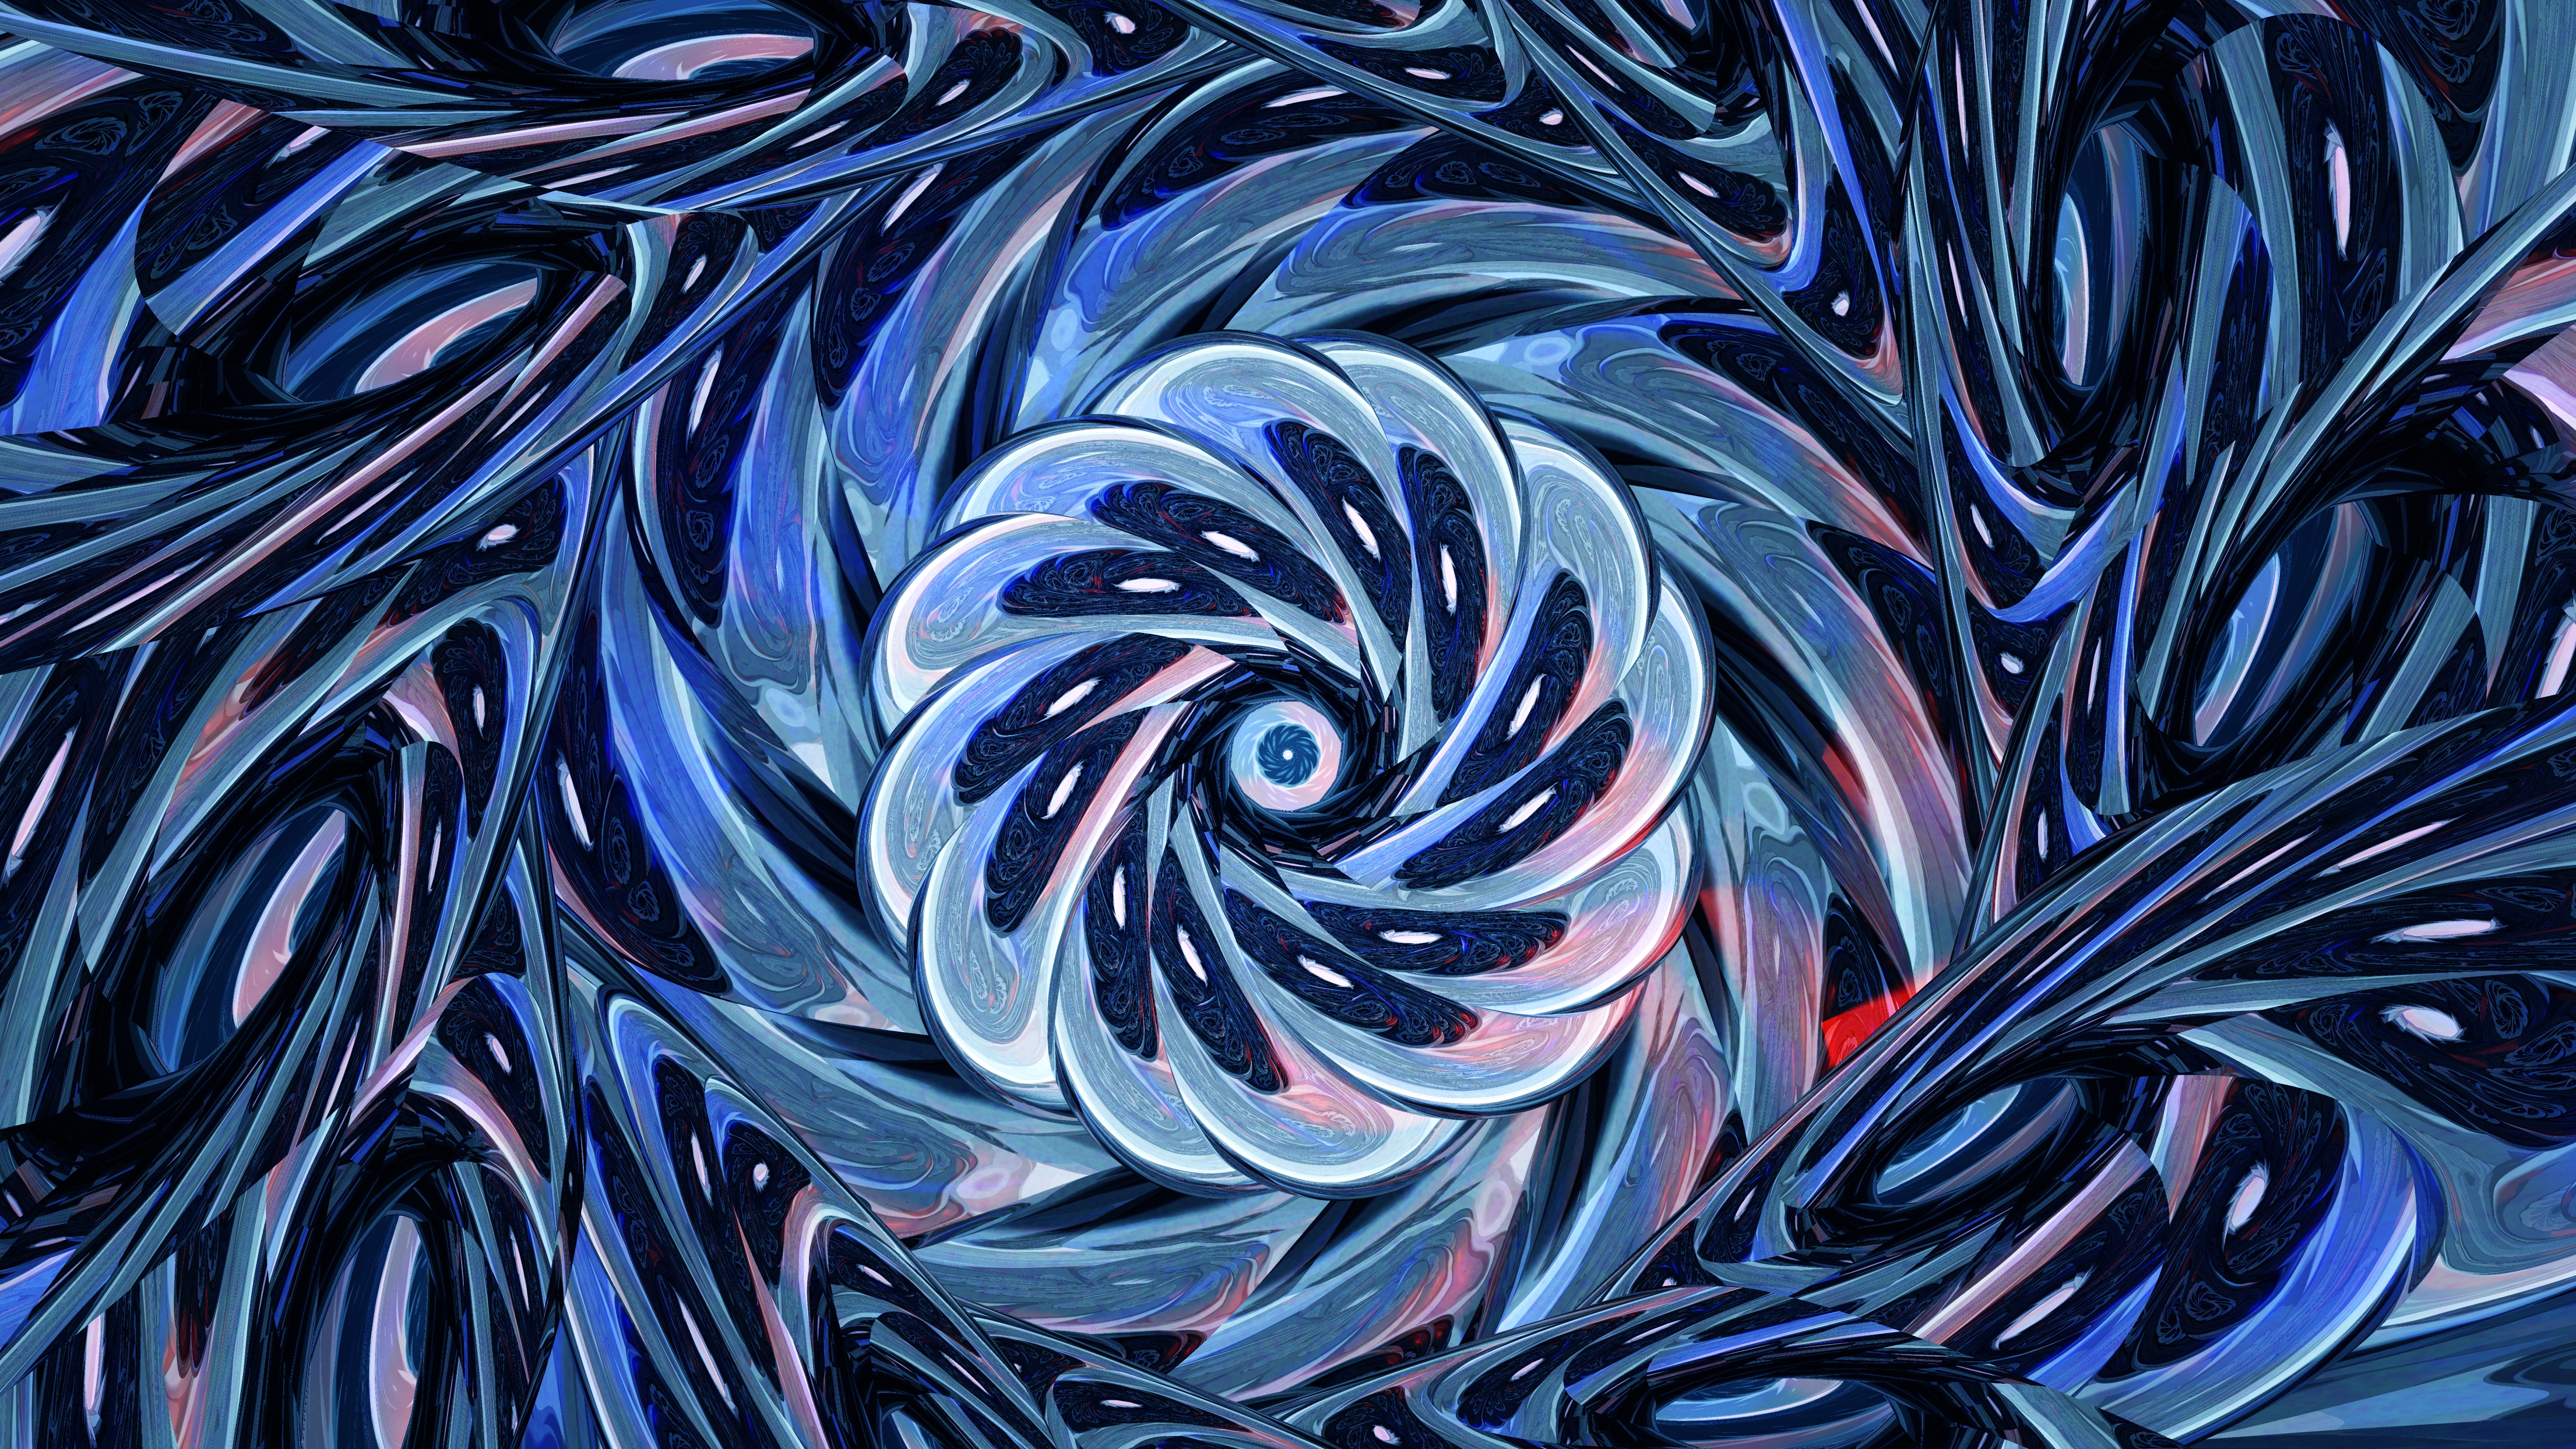 abstract, fractal, confused, intricate, swirling, involute, digital